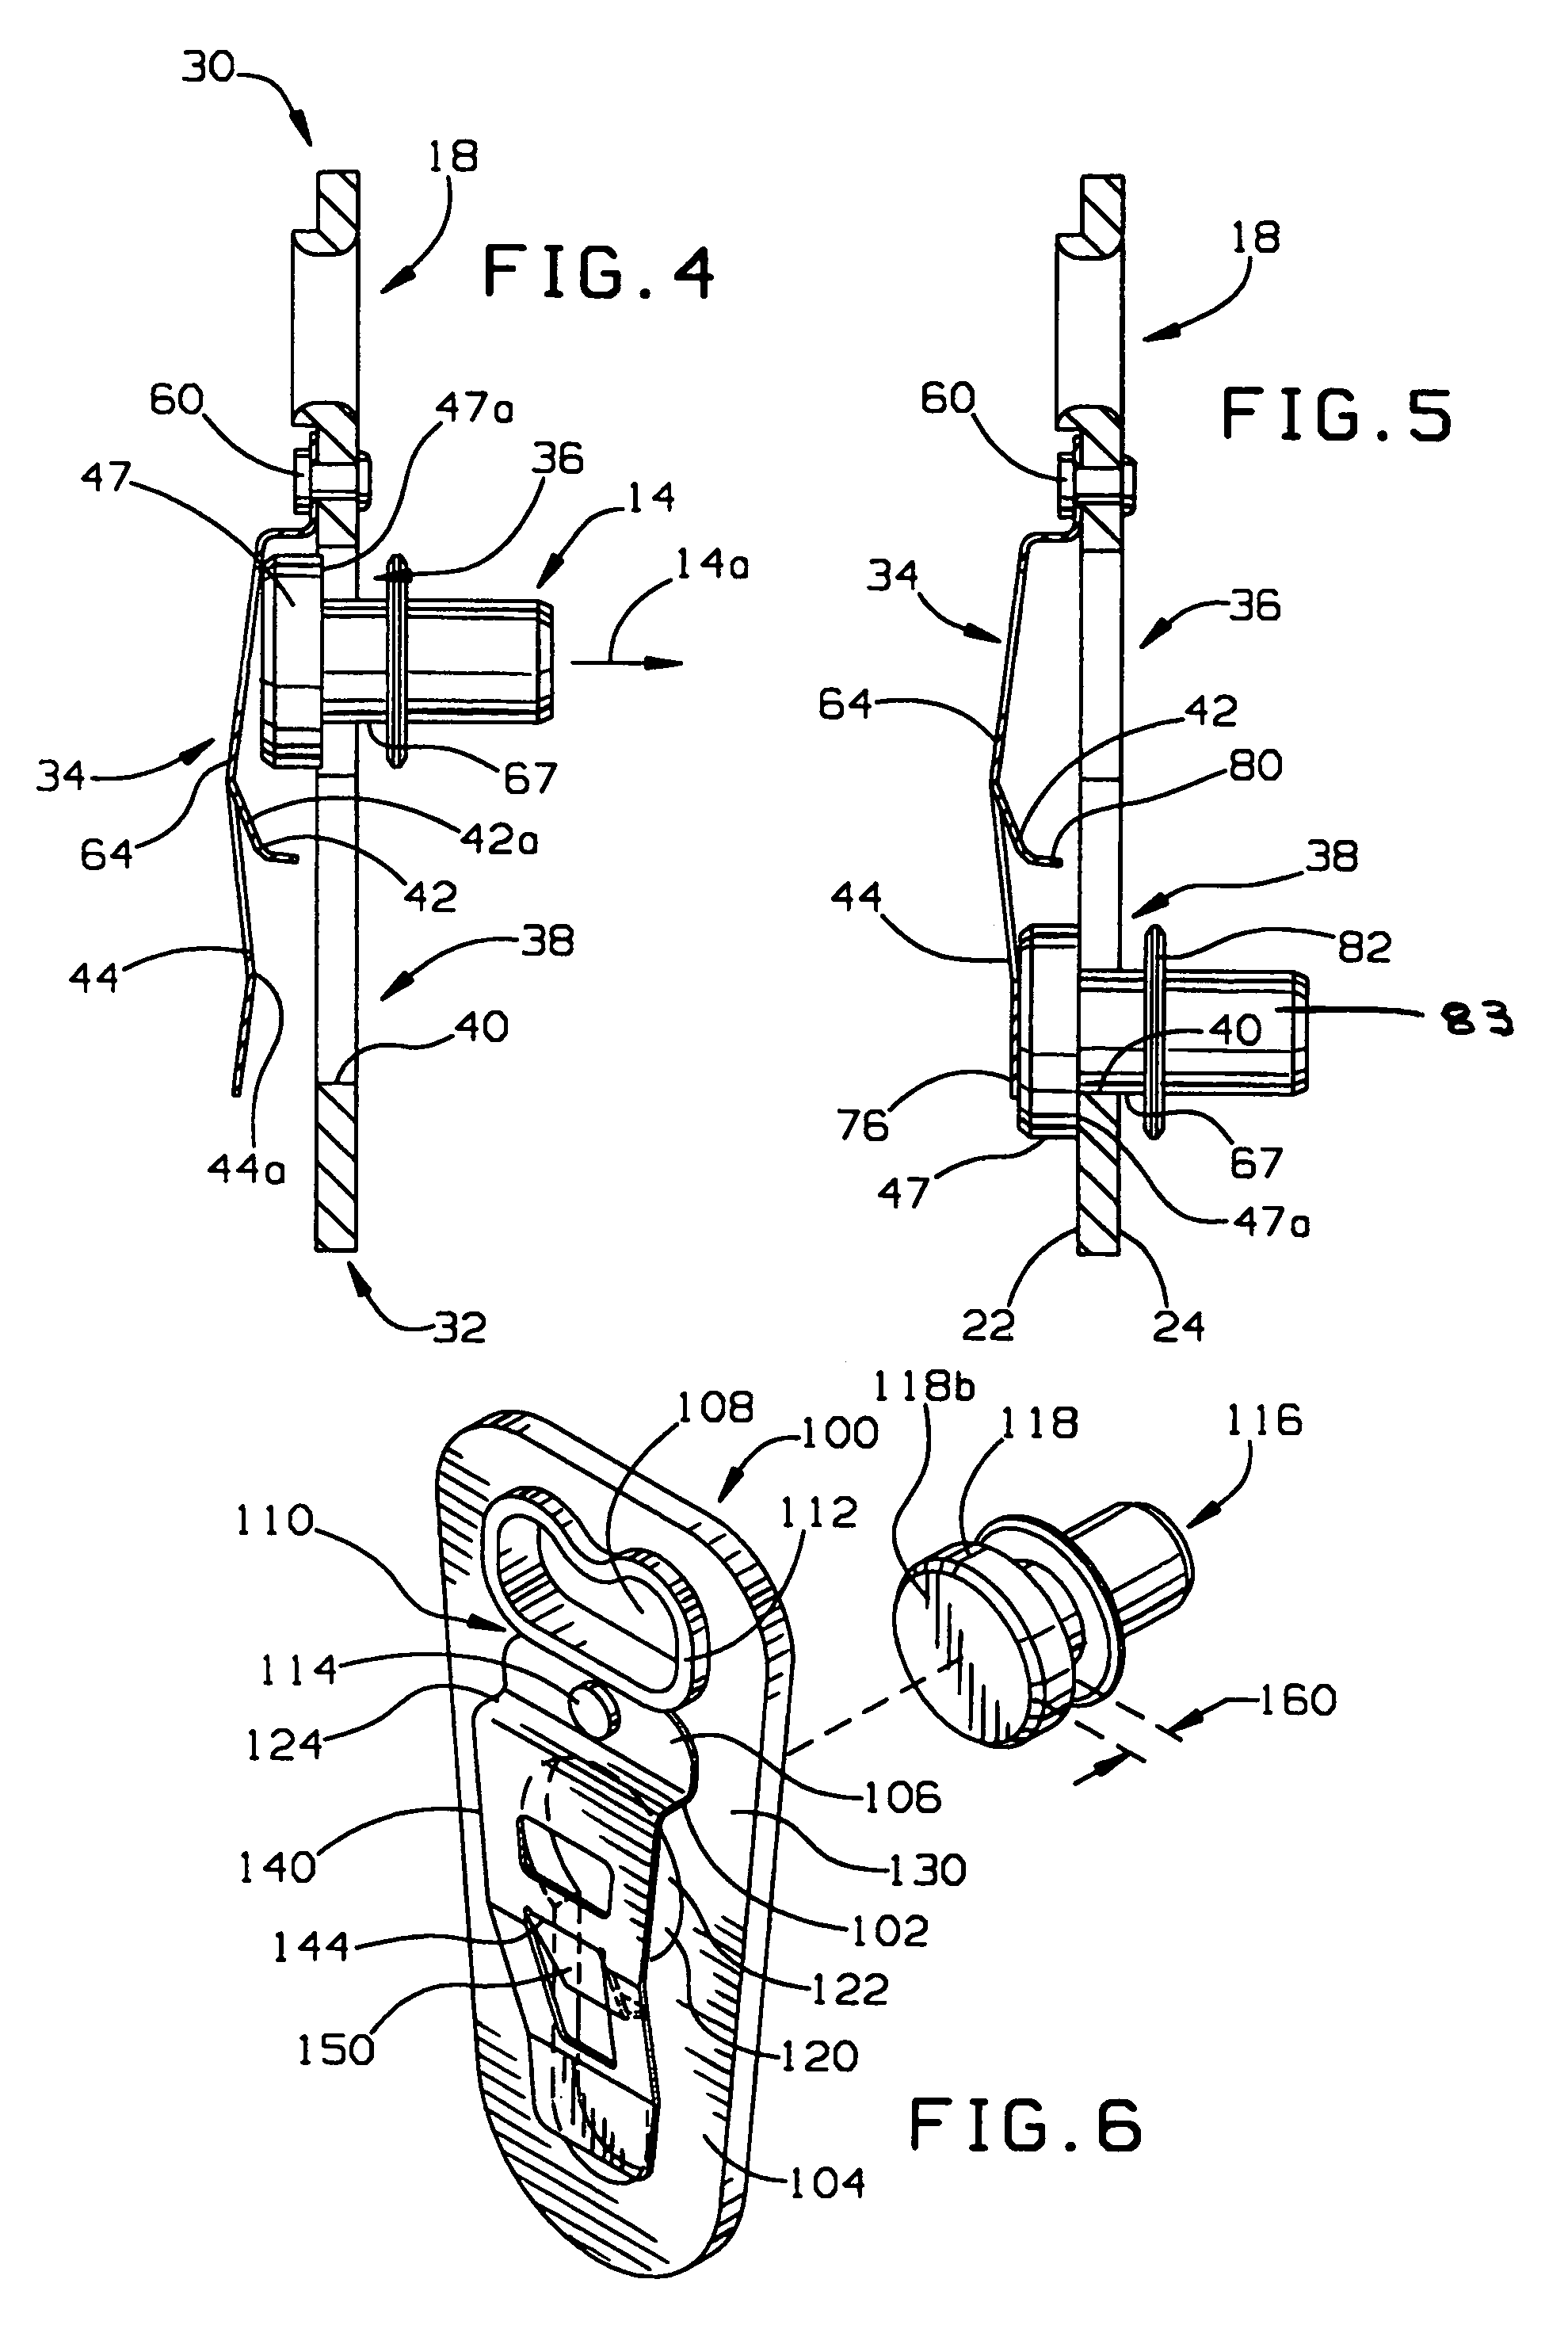 Seat belt anchor device and method